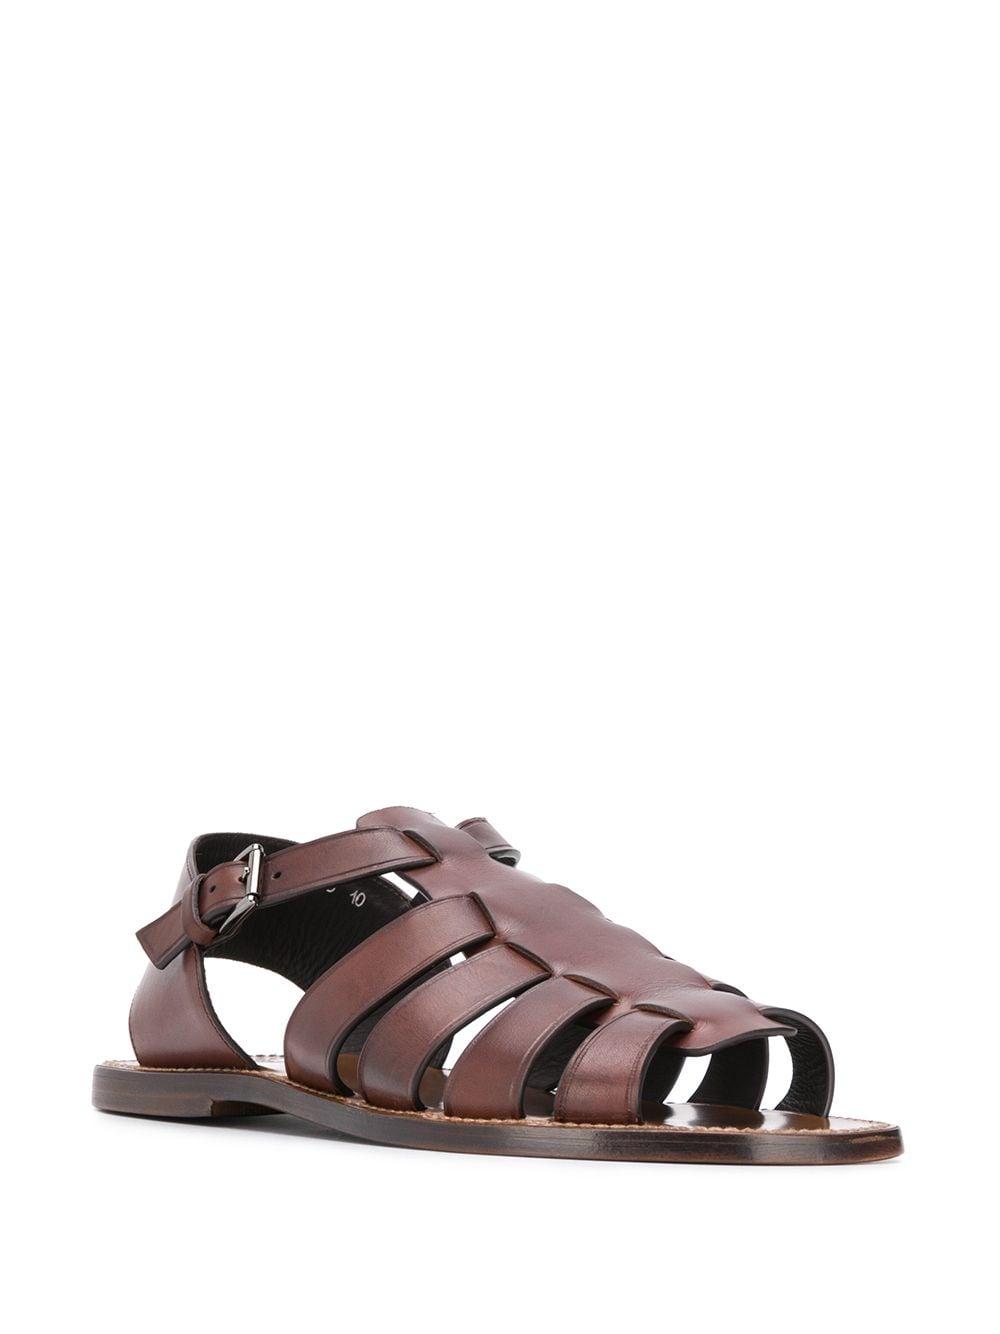 Silvano Sassetti Strappy Side Buckle Sandals in Brown for Men - Lyst